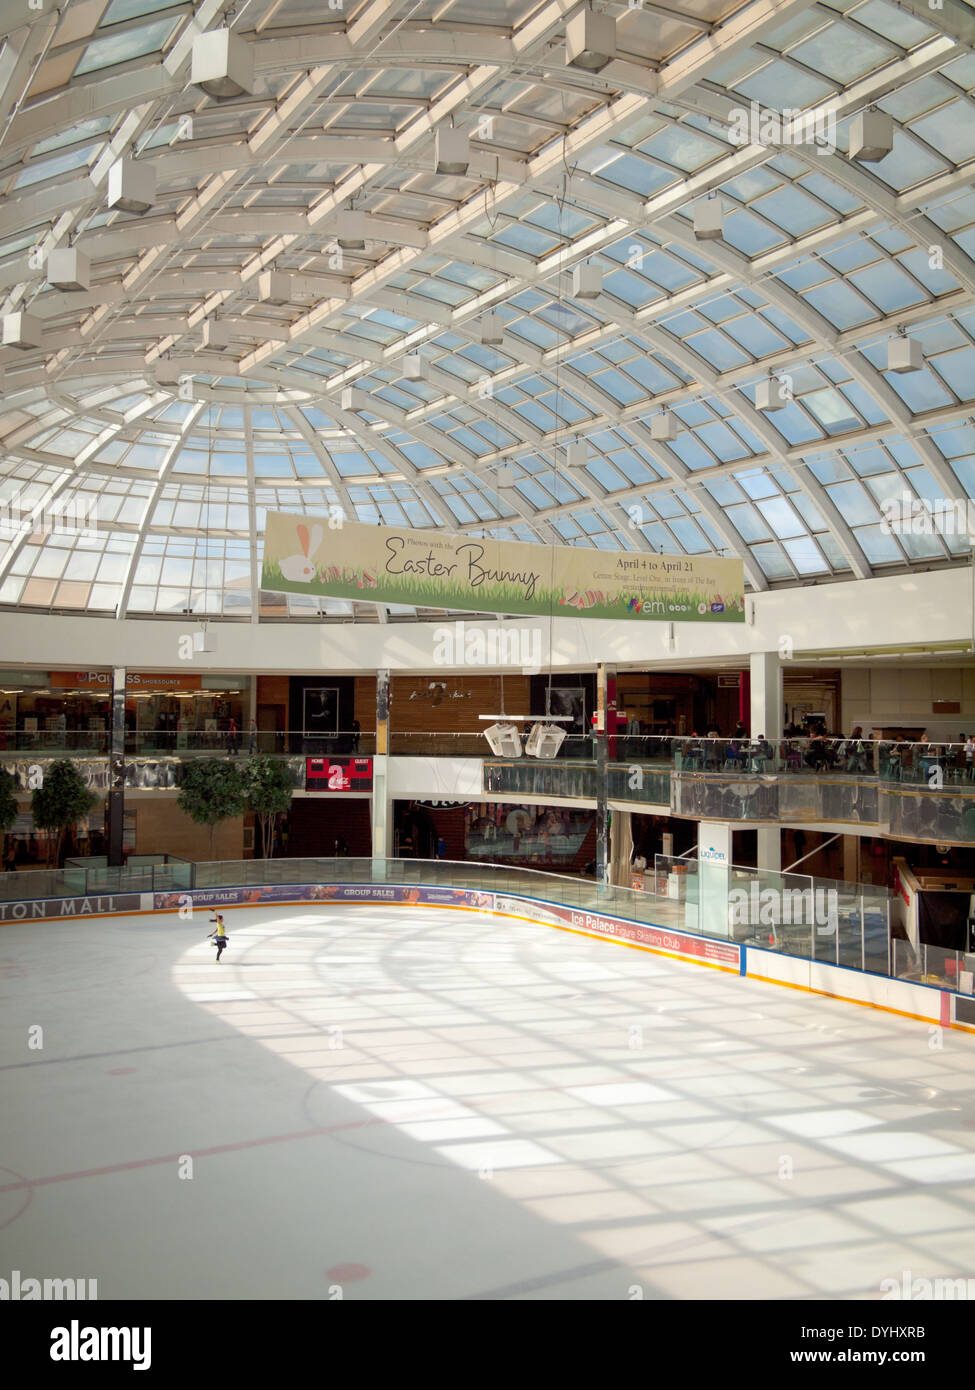 A view of the Ice Palace skating rink at West Edmonton Mall in Edmonton, Alberta, Canada. Stock Photo